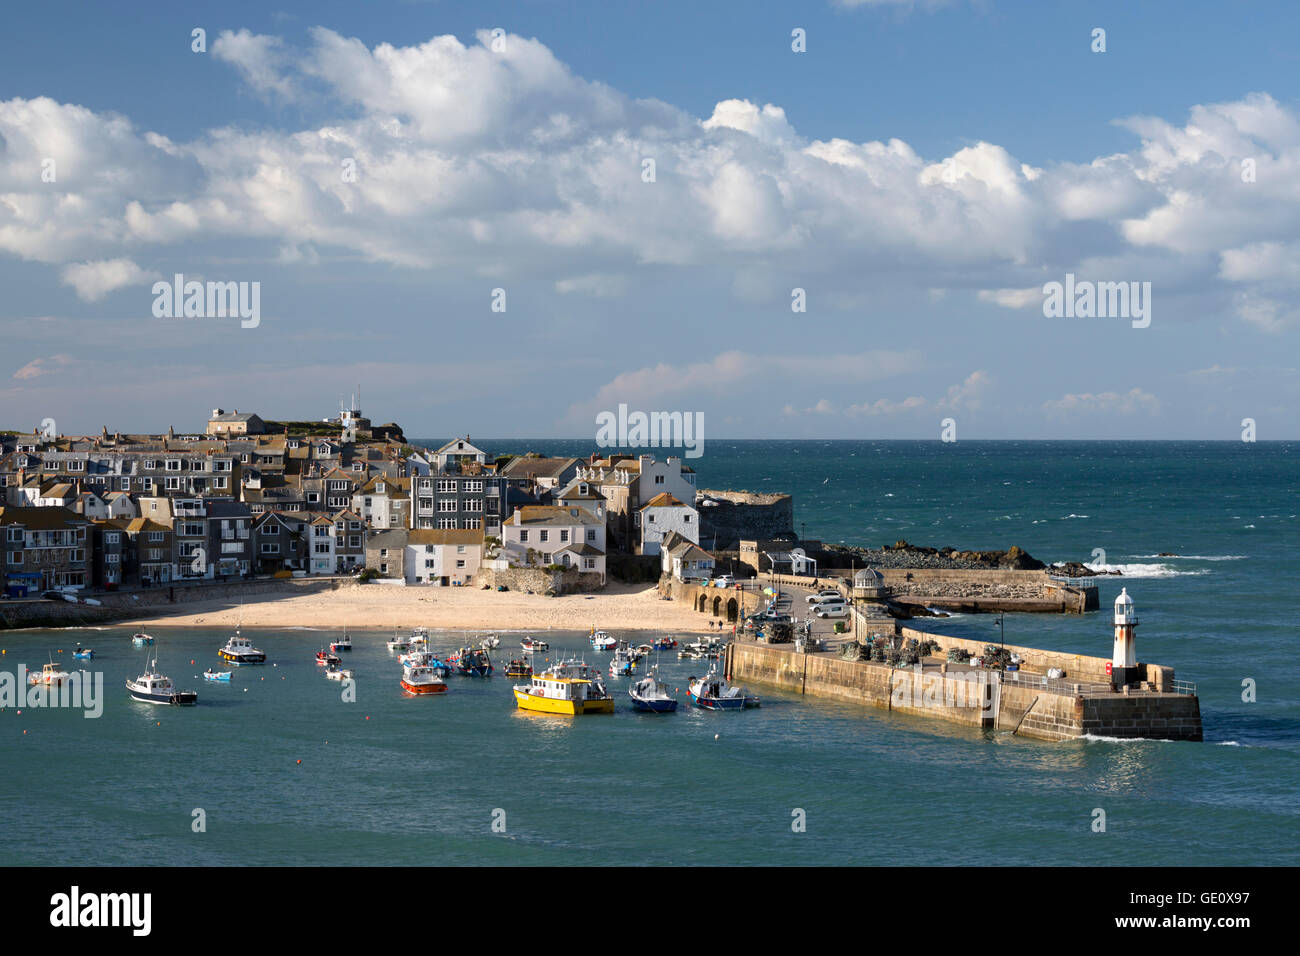 View of old town and harbour with Smeatons Pier viewed from The Malakoff, St Ives, Cornwall, England, United Kingdom, Europe Stock Photo